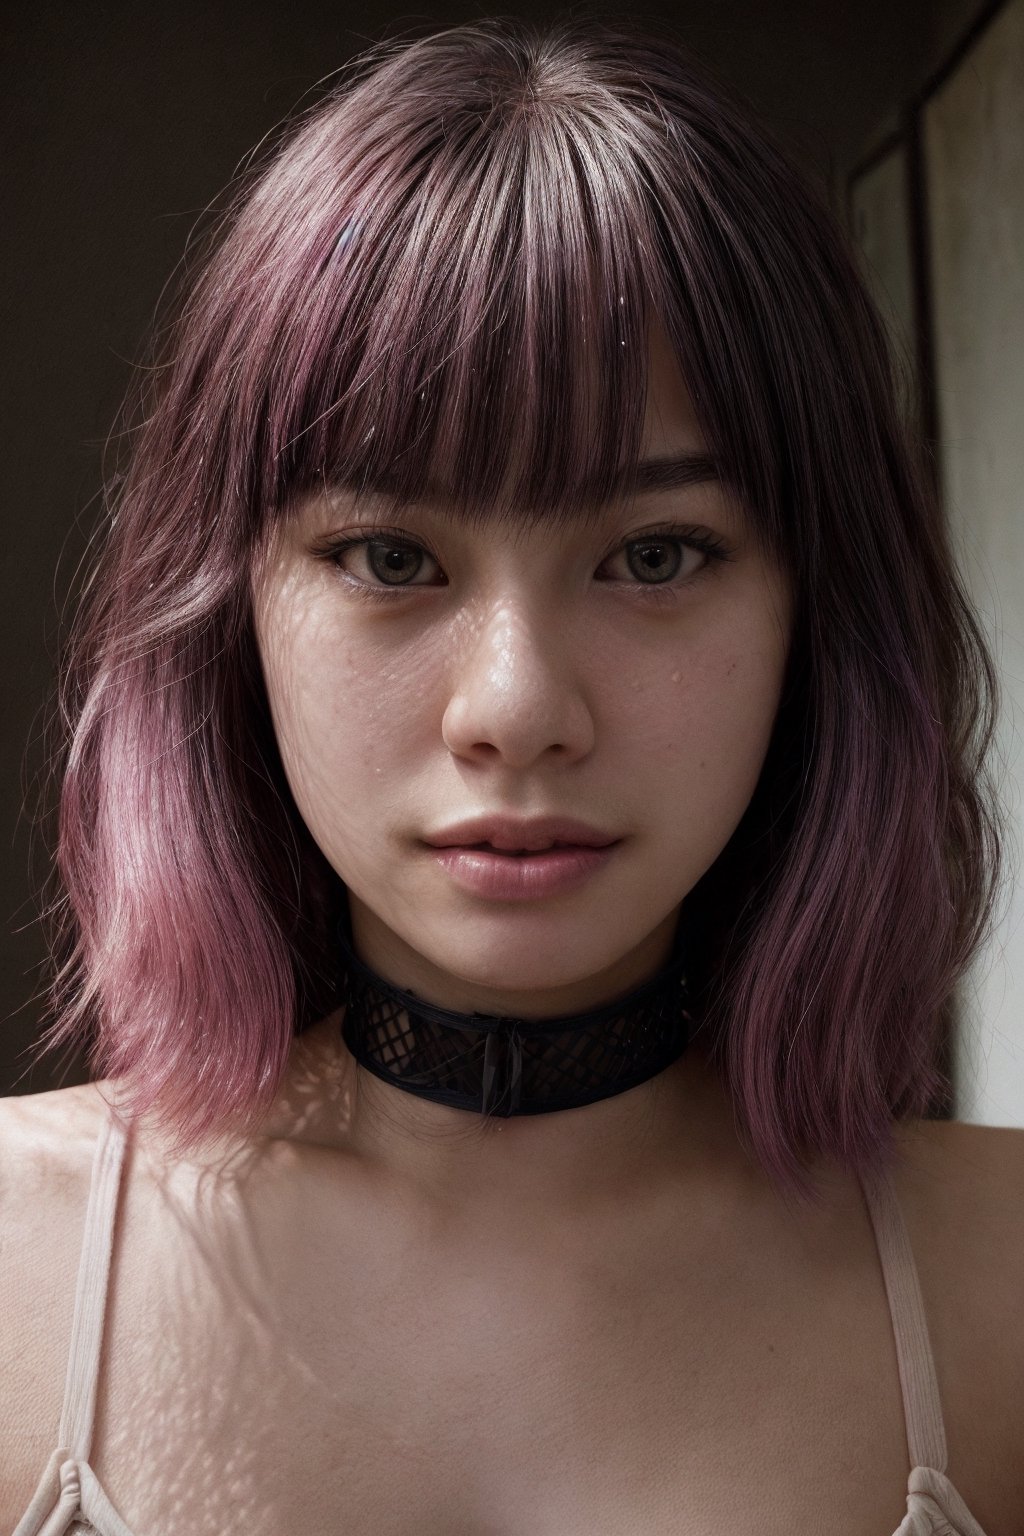 photo, rule of thirds, dramatic lighting, medium wavy hair, pink hair, violet eyes, detailed face, detailed nose with septum piercing, beautiful 20yo asian girl, woman wearing tank top, collar or choker, big breasts, smirk, intricate background
,realism,realistic,raw,analog,woman,portrait,photorealistic,analog,realism, 